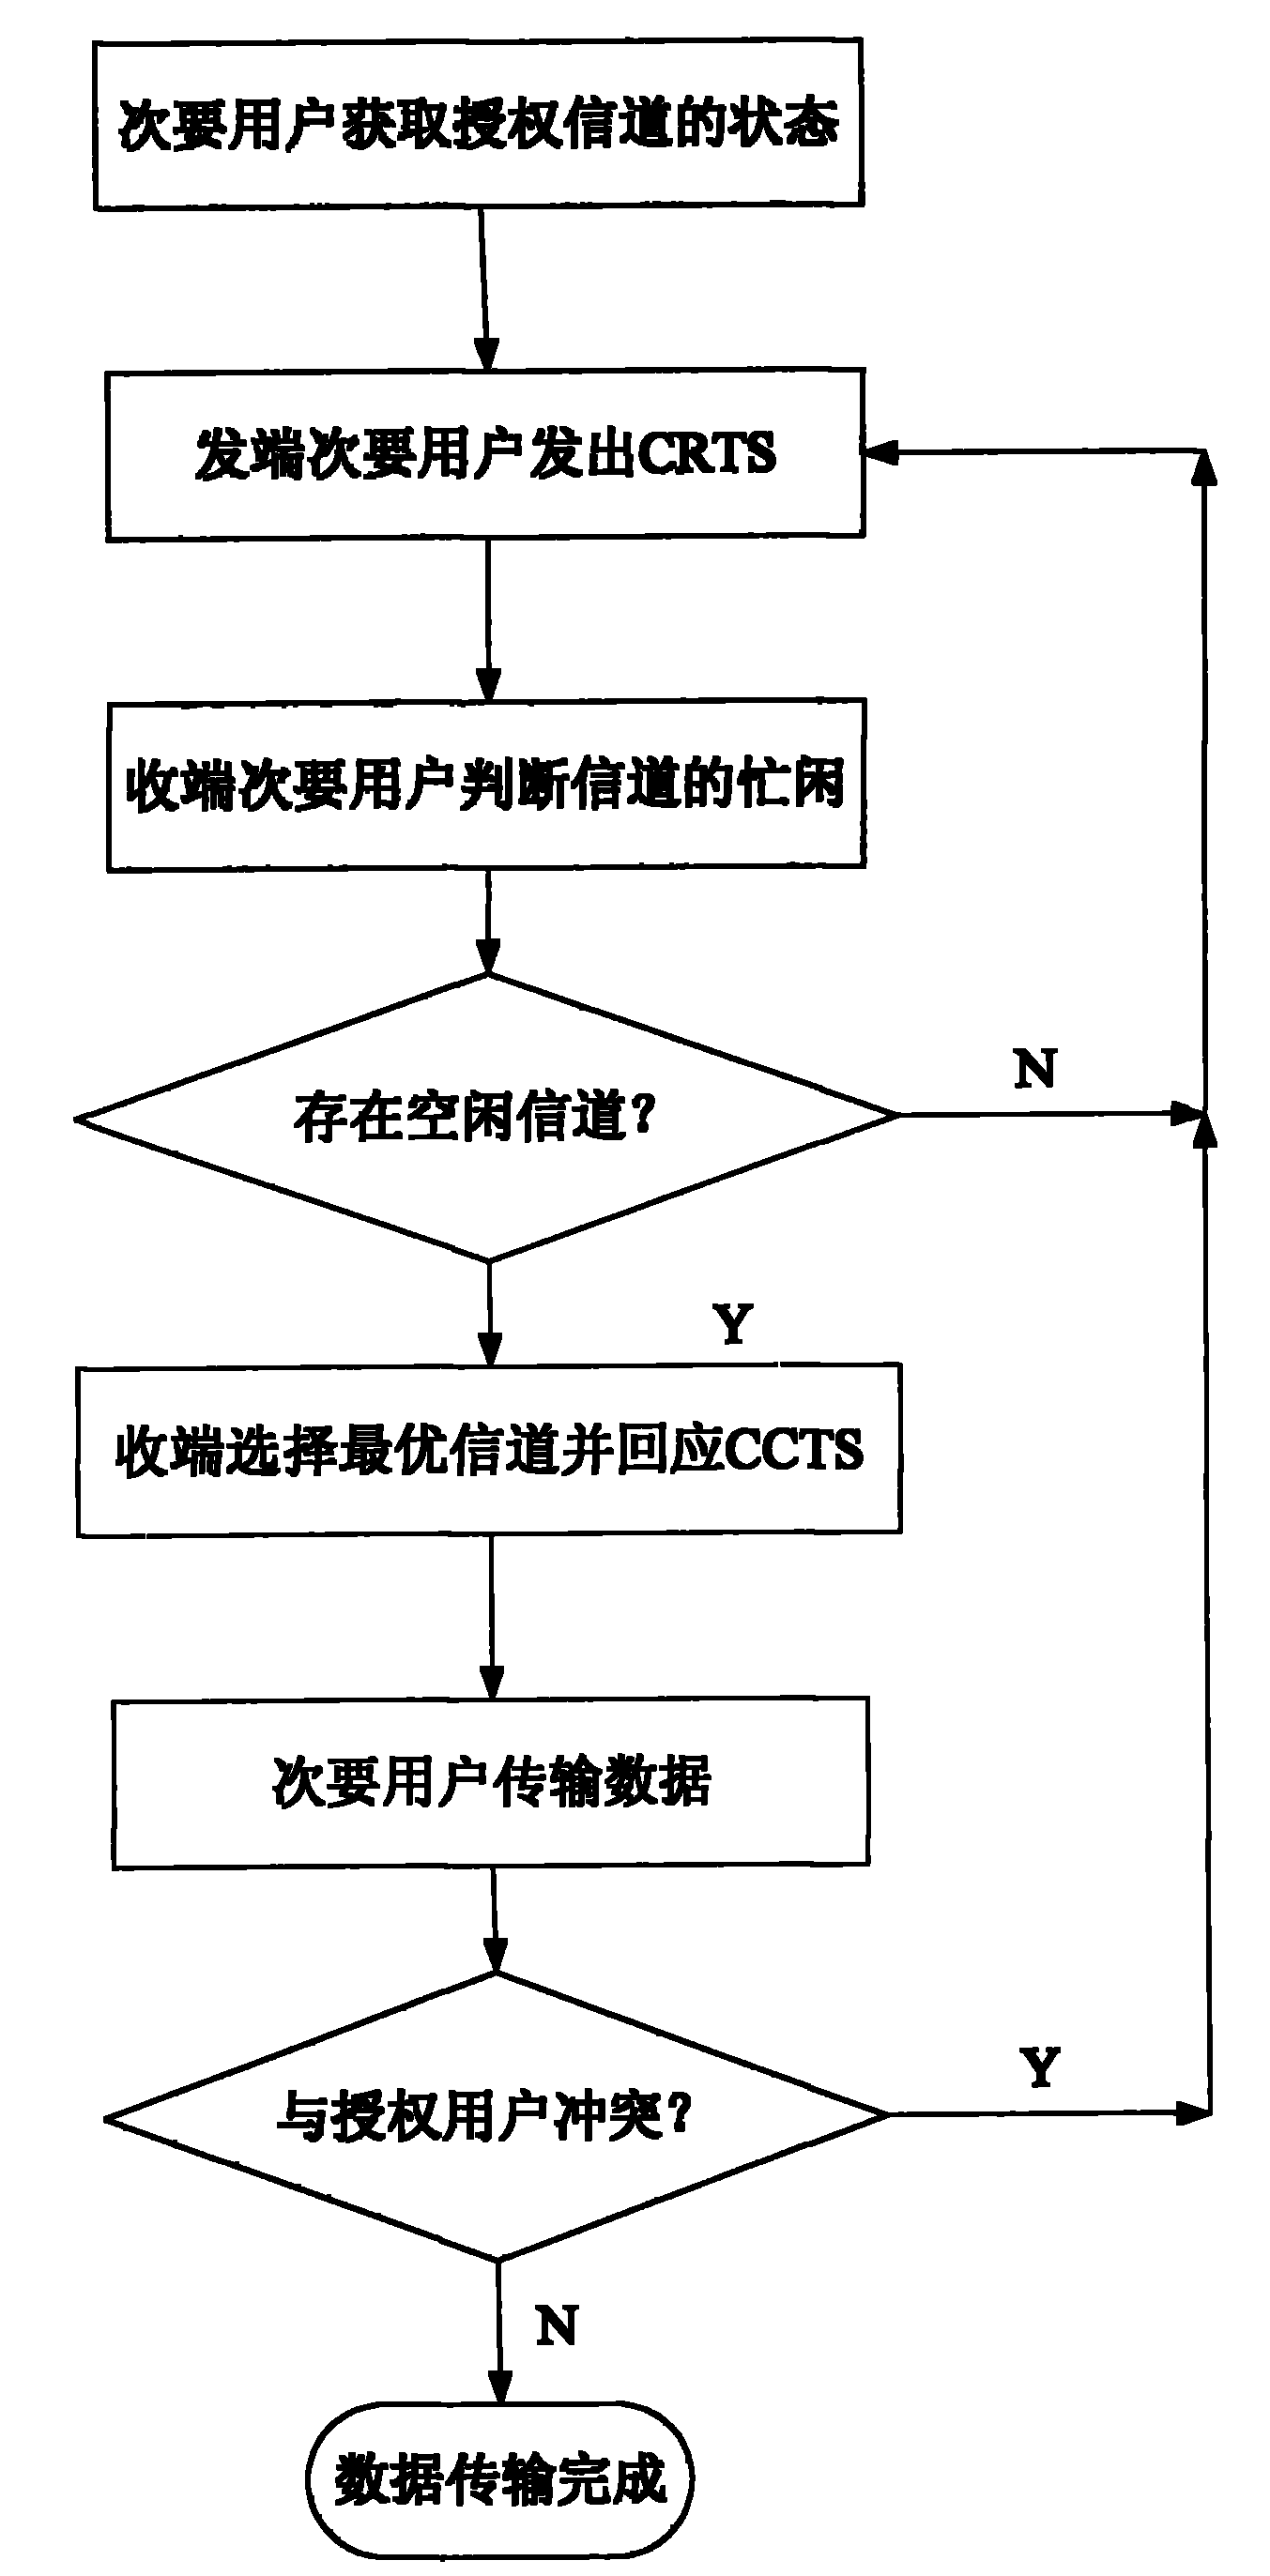 Frequency spectrum access method using idle channel in cognitive radio network